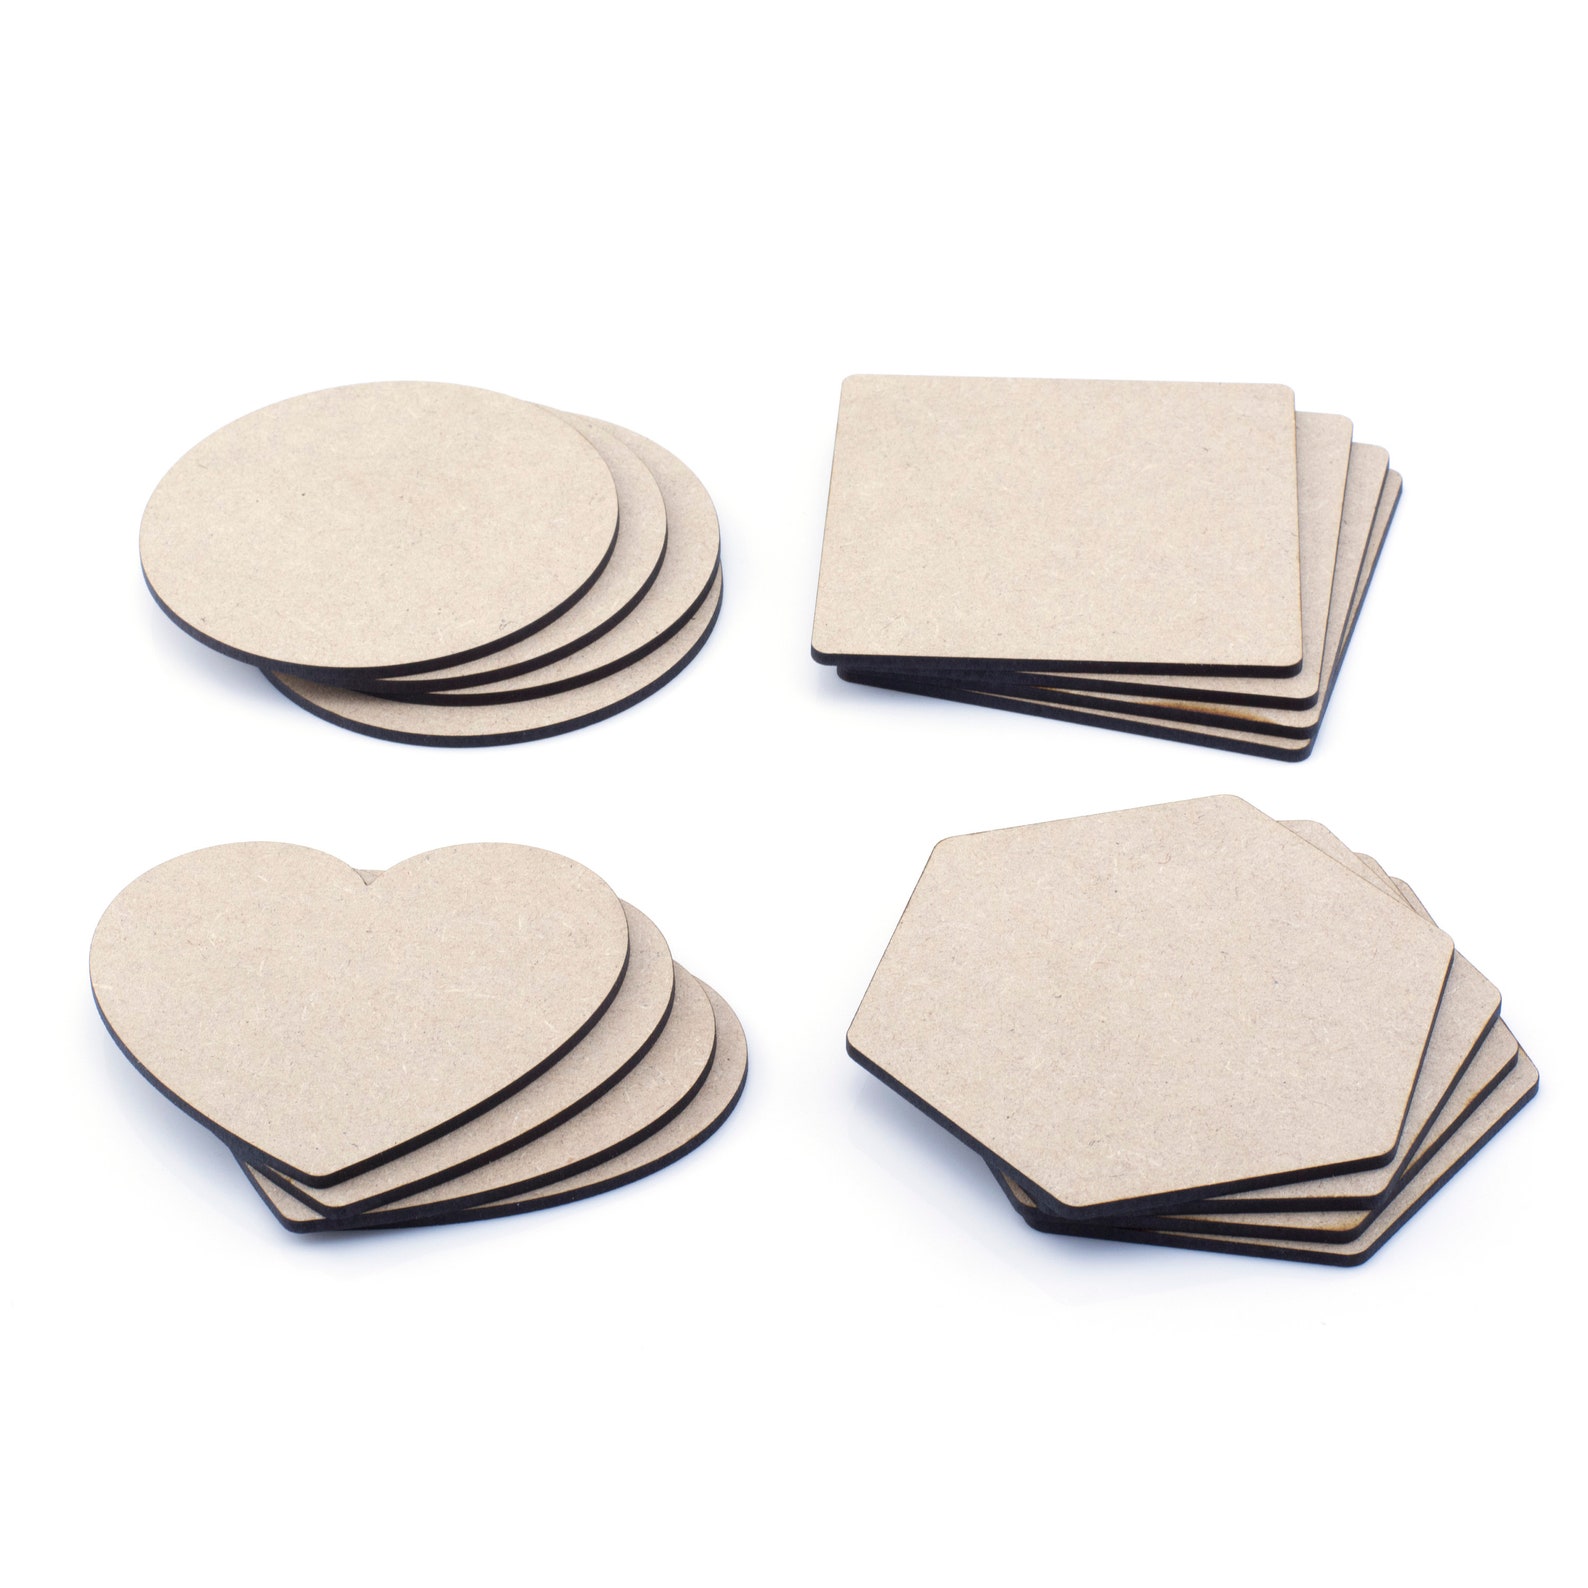 10 X Wooden Mdf Coaster Blanks Craft Painting 100mm Circle Etsy